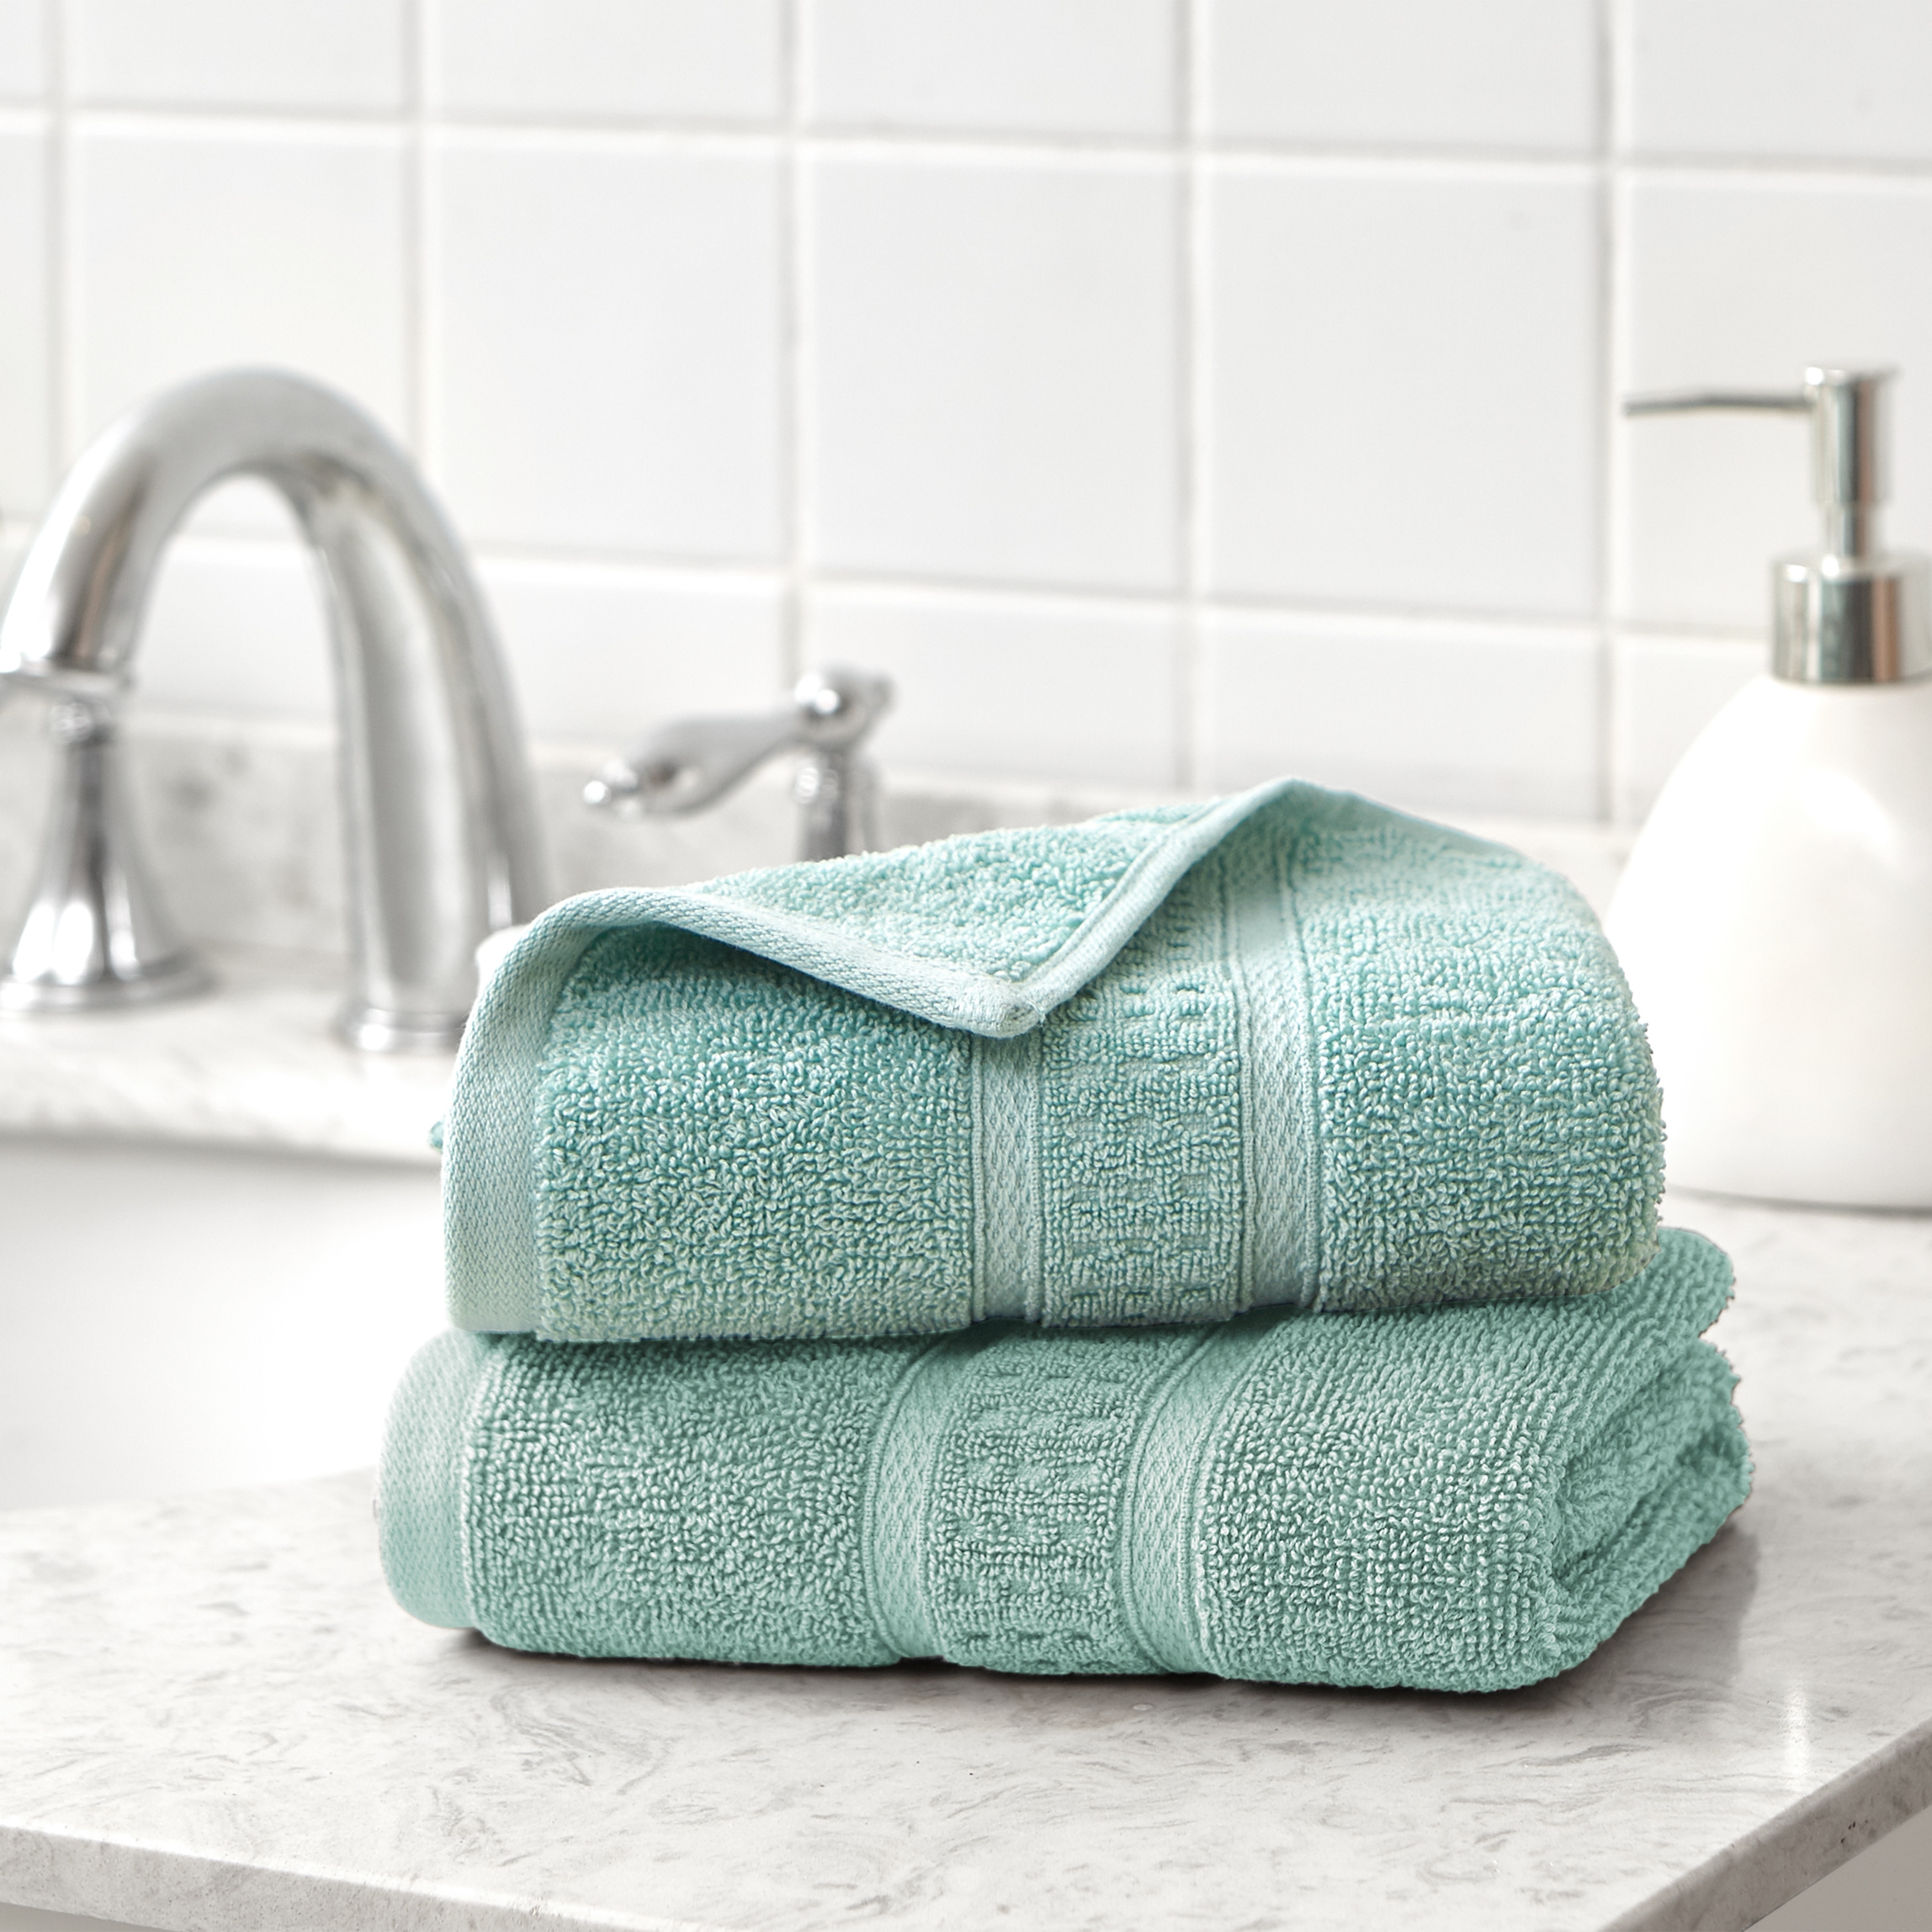 https://ak1.ostkcdn.com/images/products/is/images/direct/f569a1a6dcf2163bf62935472ee151fe71944c51/Nautica-Oceane-Solid-Wellness-Towel-Collection.jpg